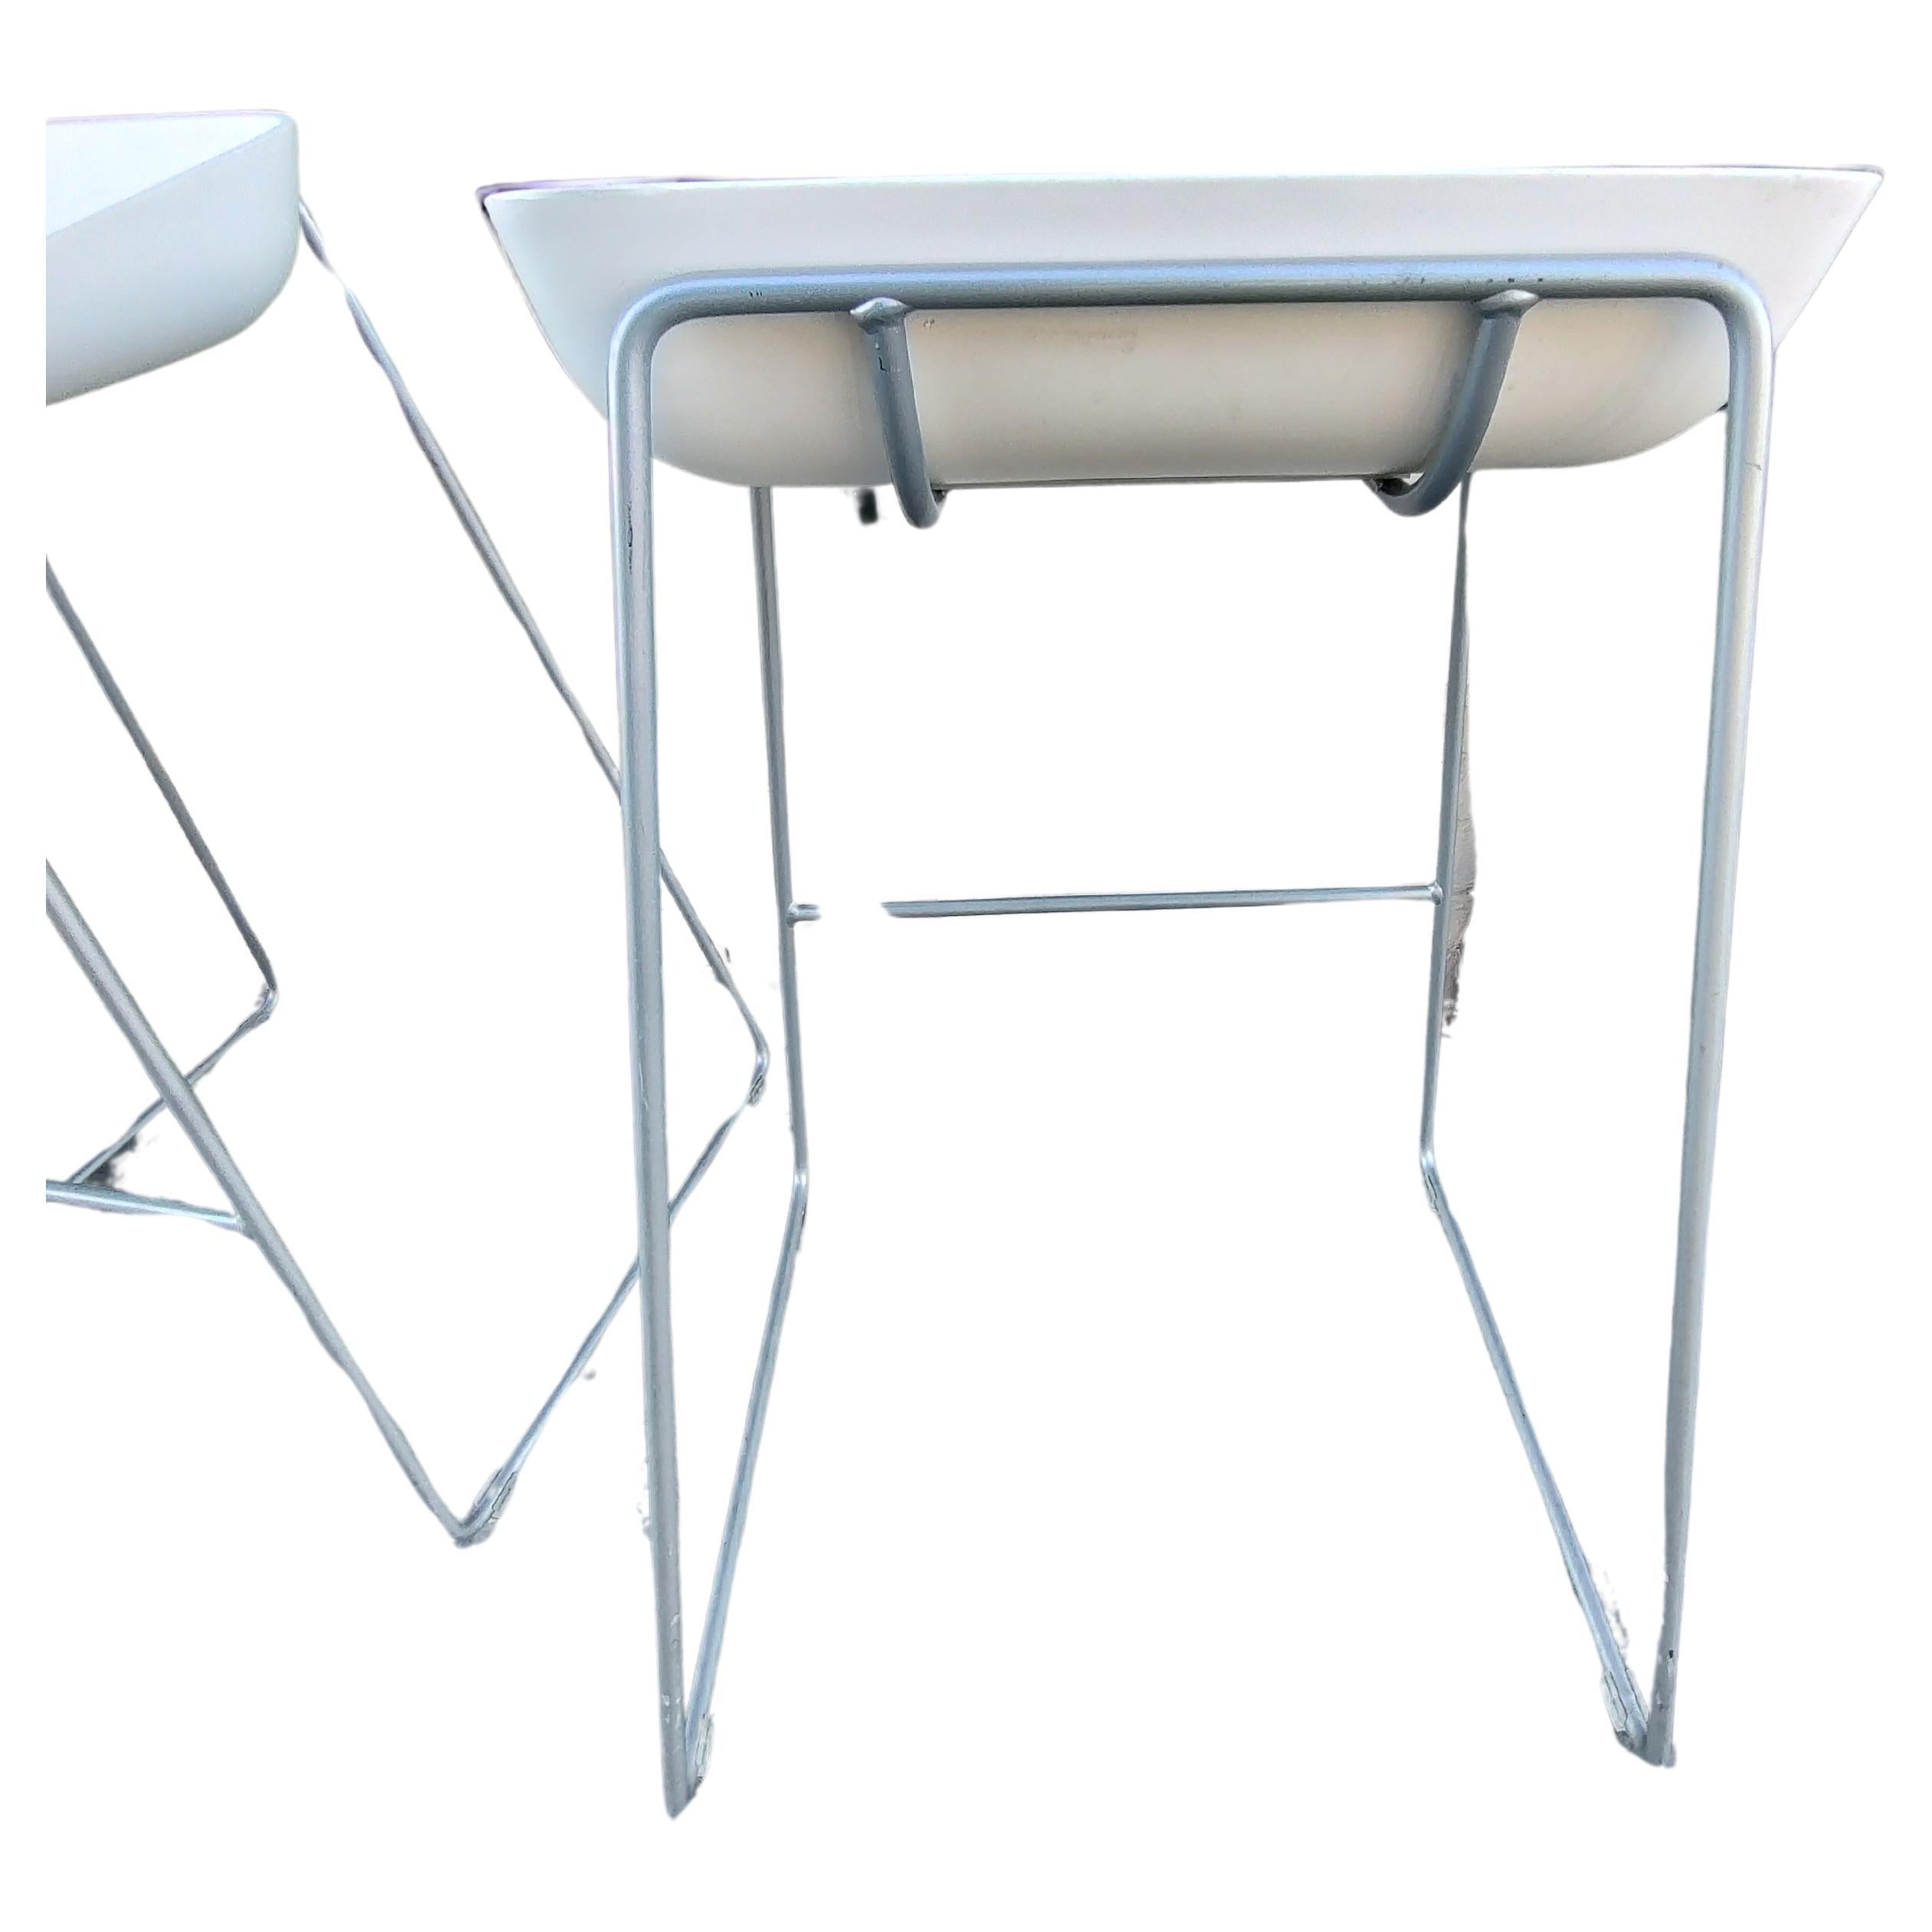 Great set of 3 Steelcase scoop bar stools with steel frames and molded plastic, hard plastic with a cushioned seat. Sold and priced as a set of 3. In excellent vintage condition with minimal wear, see pics.